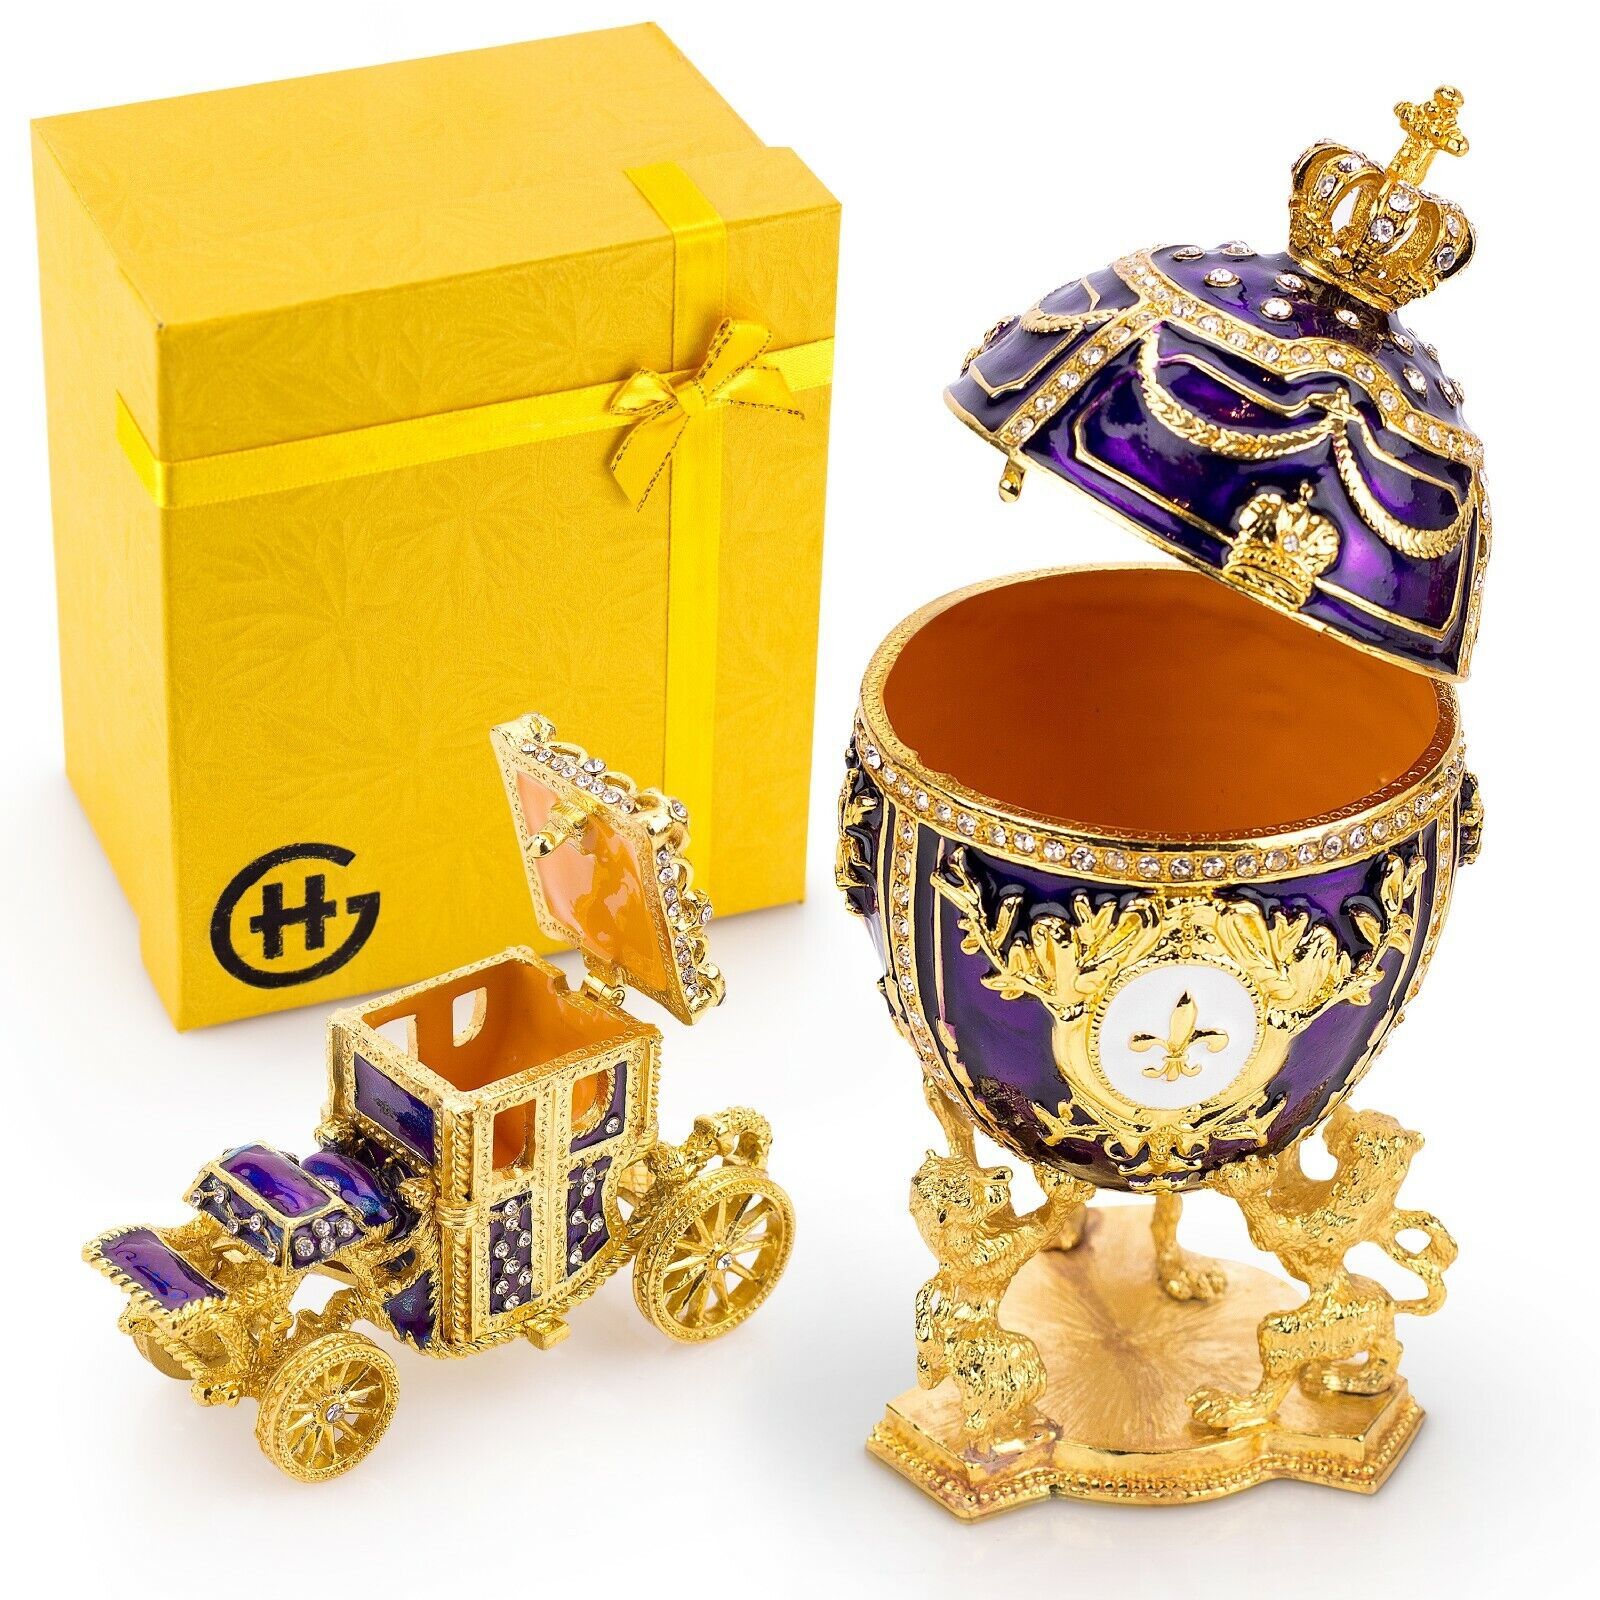 Royal Imperial Purple Faberge Egg Replica: Large 6.6 inch + Carriage by Vtry